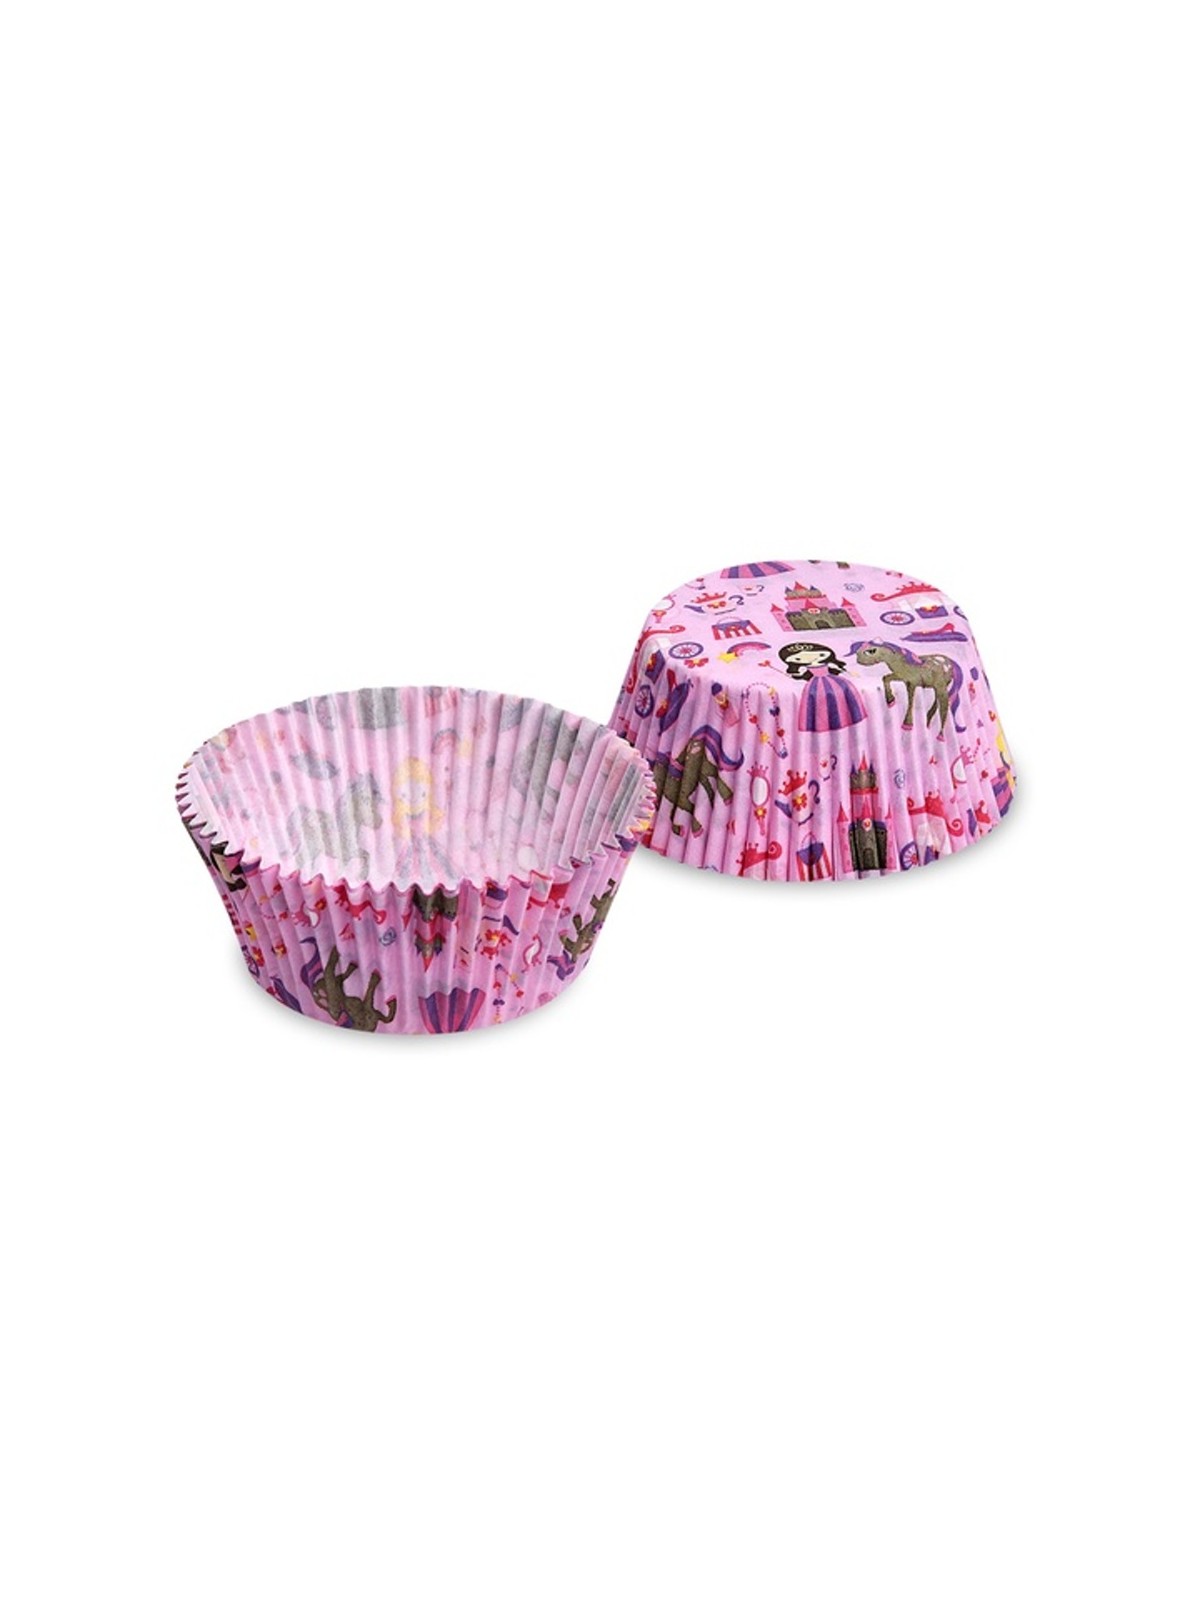 Baking Cups - Prinzessin - 40pcs